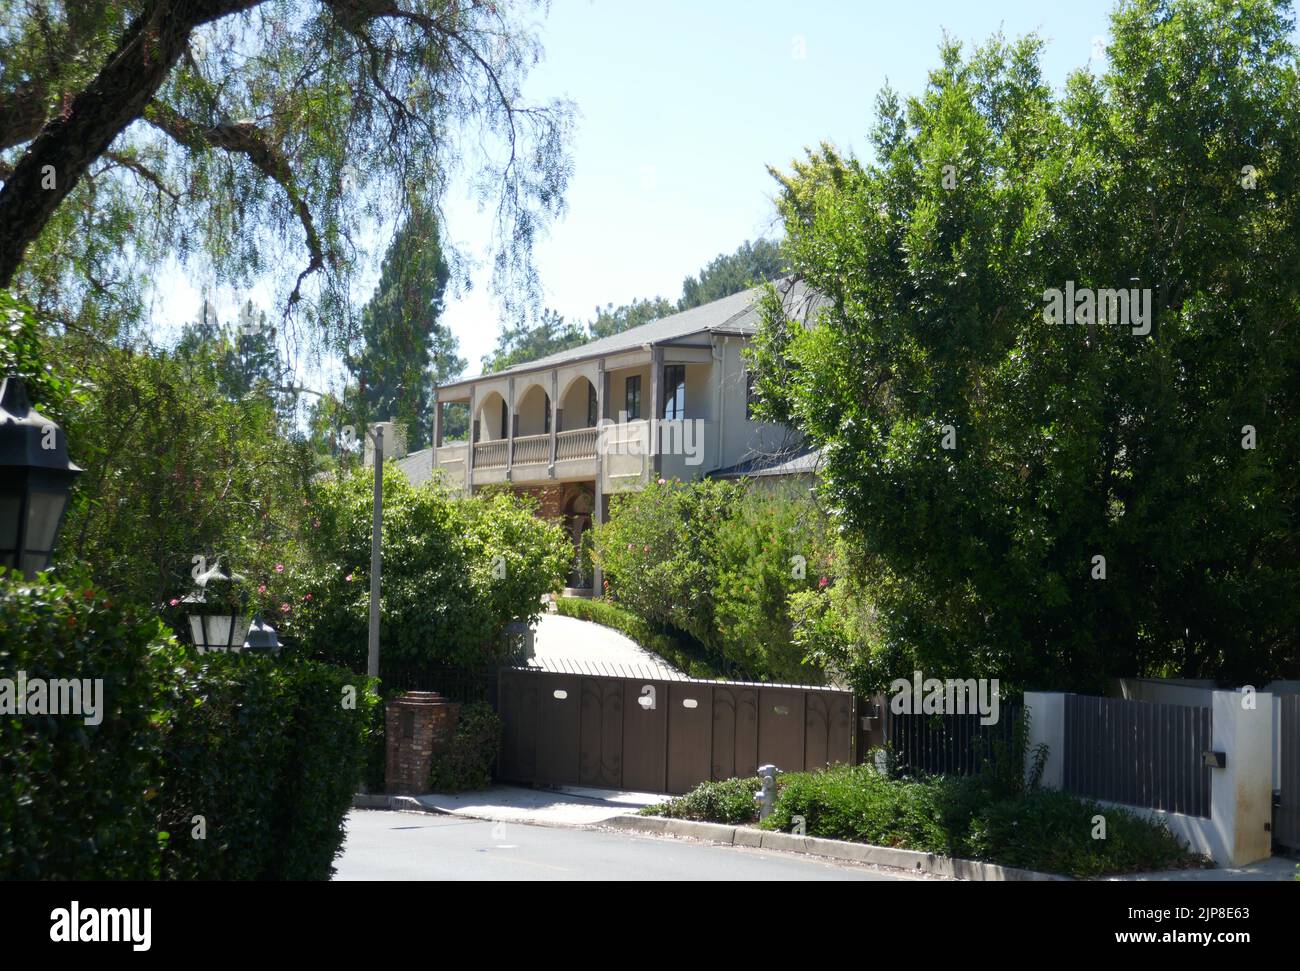 Beverly Hills, California, USA 15th August 2022 Singer Sammy Davis Jr.'s Former and Final home where he died at 1151 Summit Drive, and Actor Tony Curtis, Actress Janet Leigh, Producer Sam Jaffe, Comedian Totie Fields and Actress Joan Colins Former Home/house on August 15, 2022 in Beverly Hills, California, USA. Photo by Barry King/Alamy Stock Photo Stock Photo